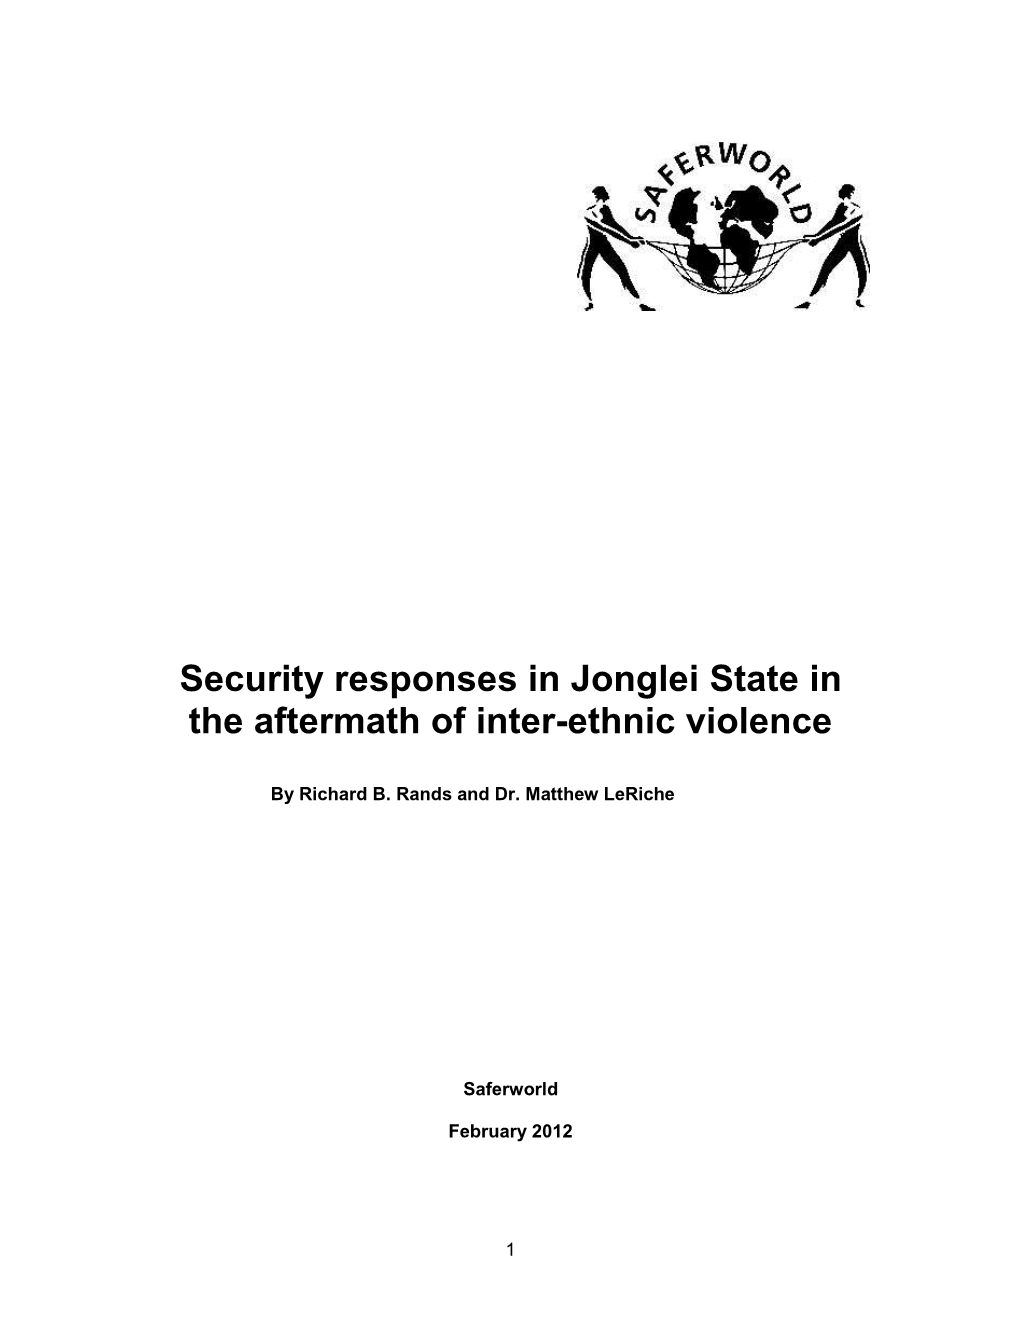 Security Responses in Jonglei State in the Aftermath of Inter-Ethnic Violence